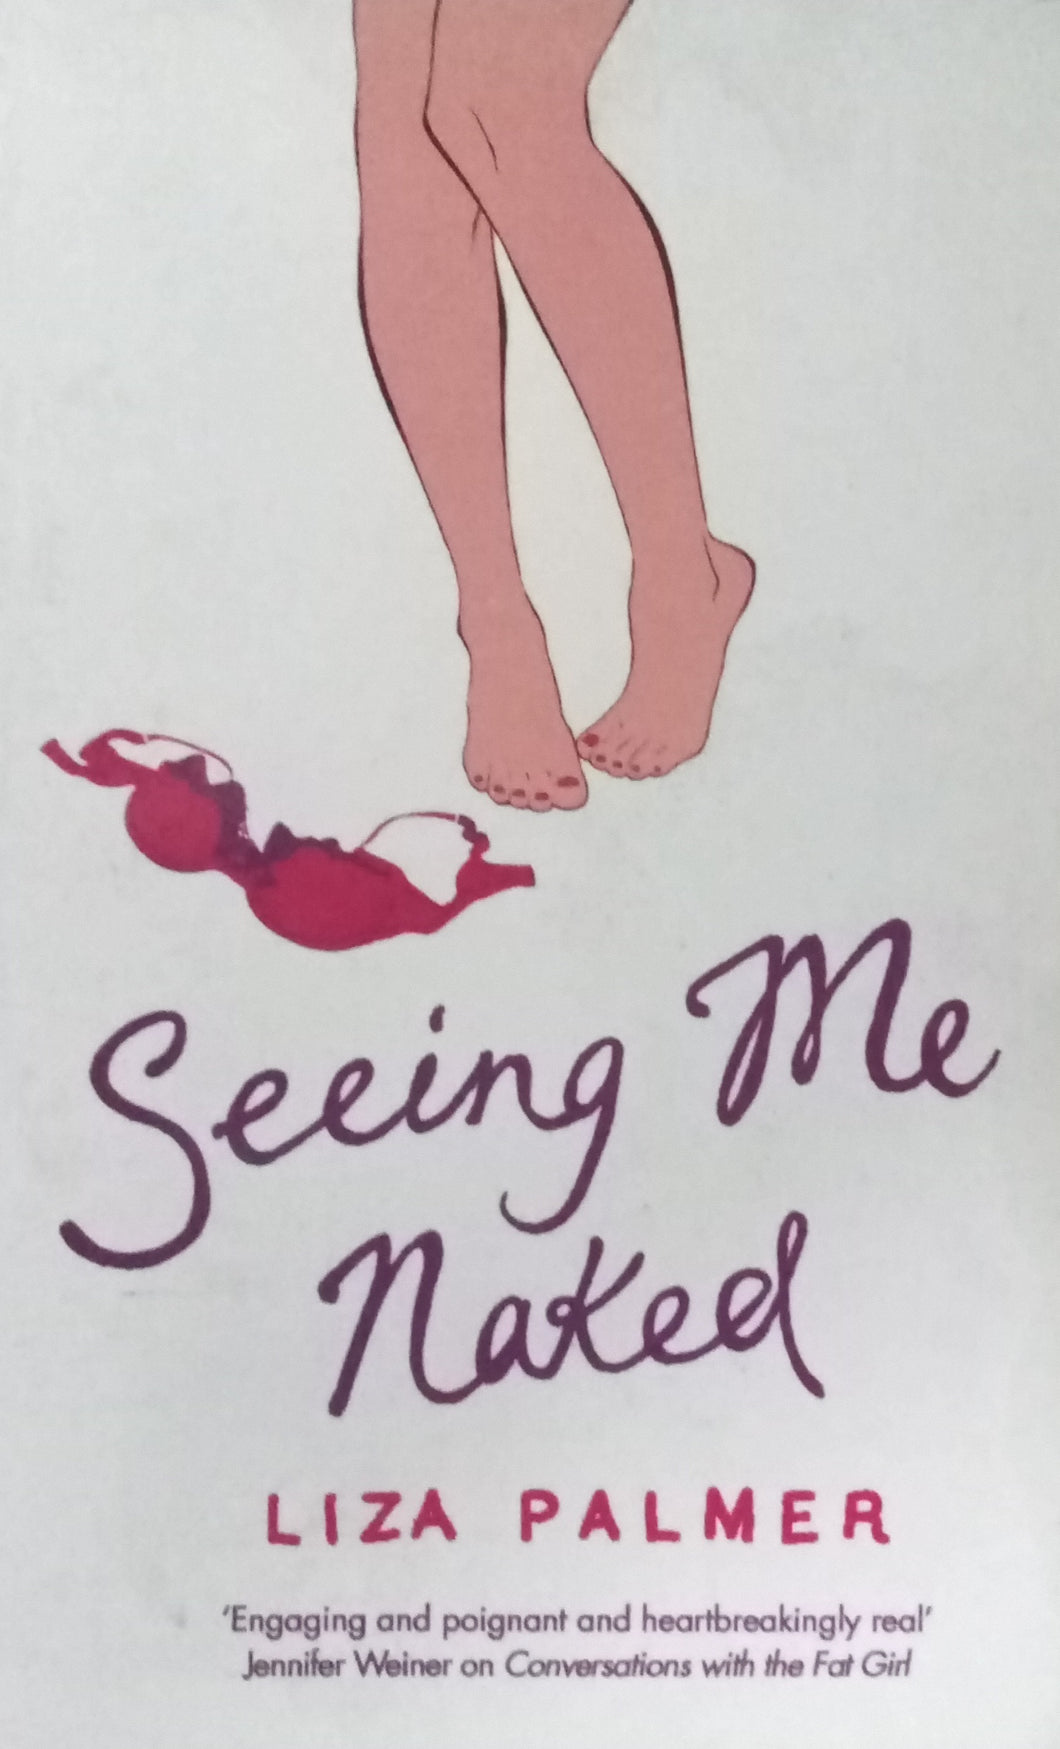 Seeing Me Naked By Liza Palmer